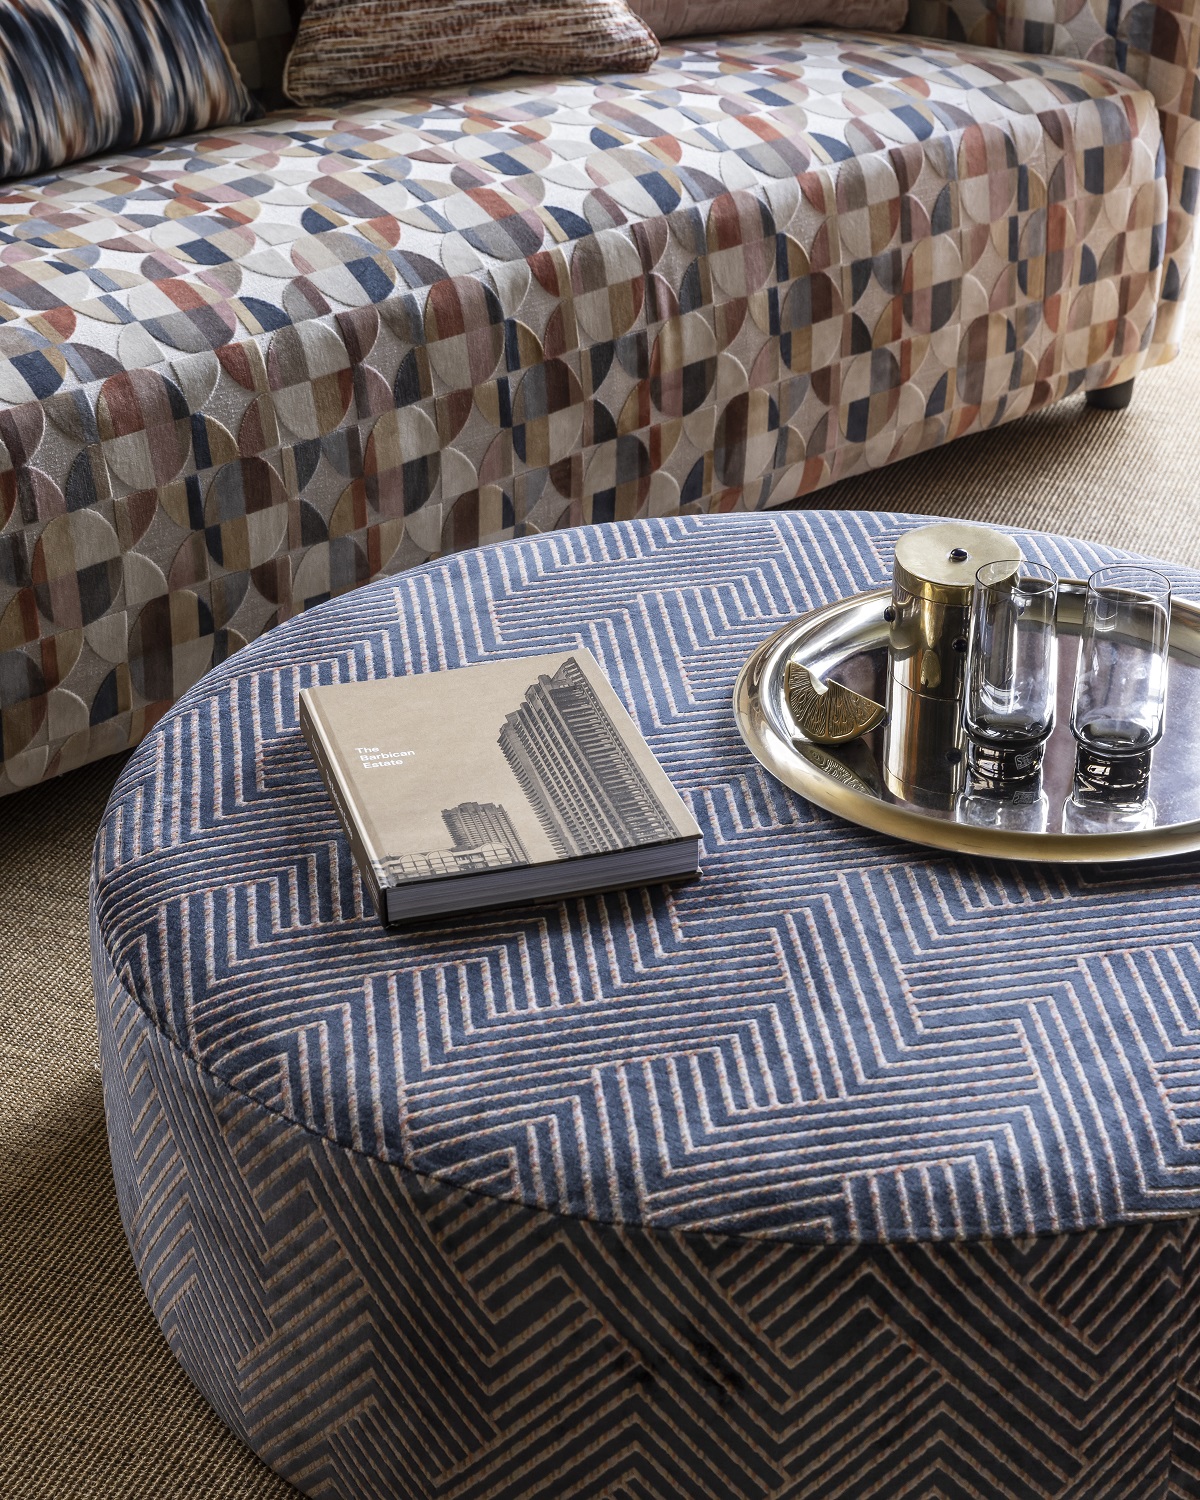 detail of fabric on an upholstered table ottoman next to a patterned couch covered in Urban fabric collection